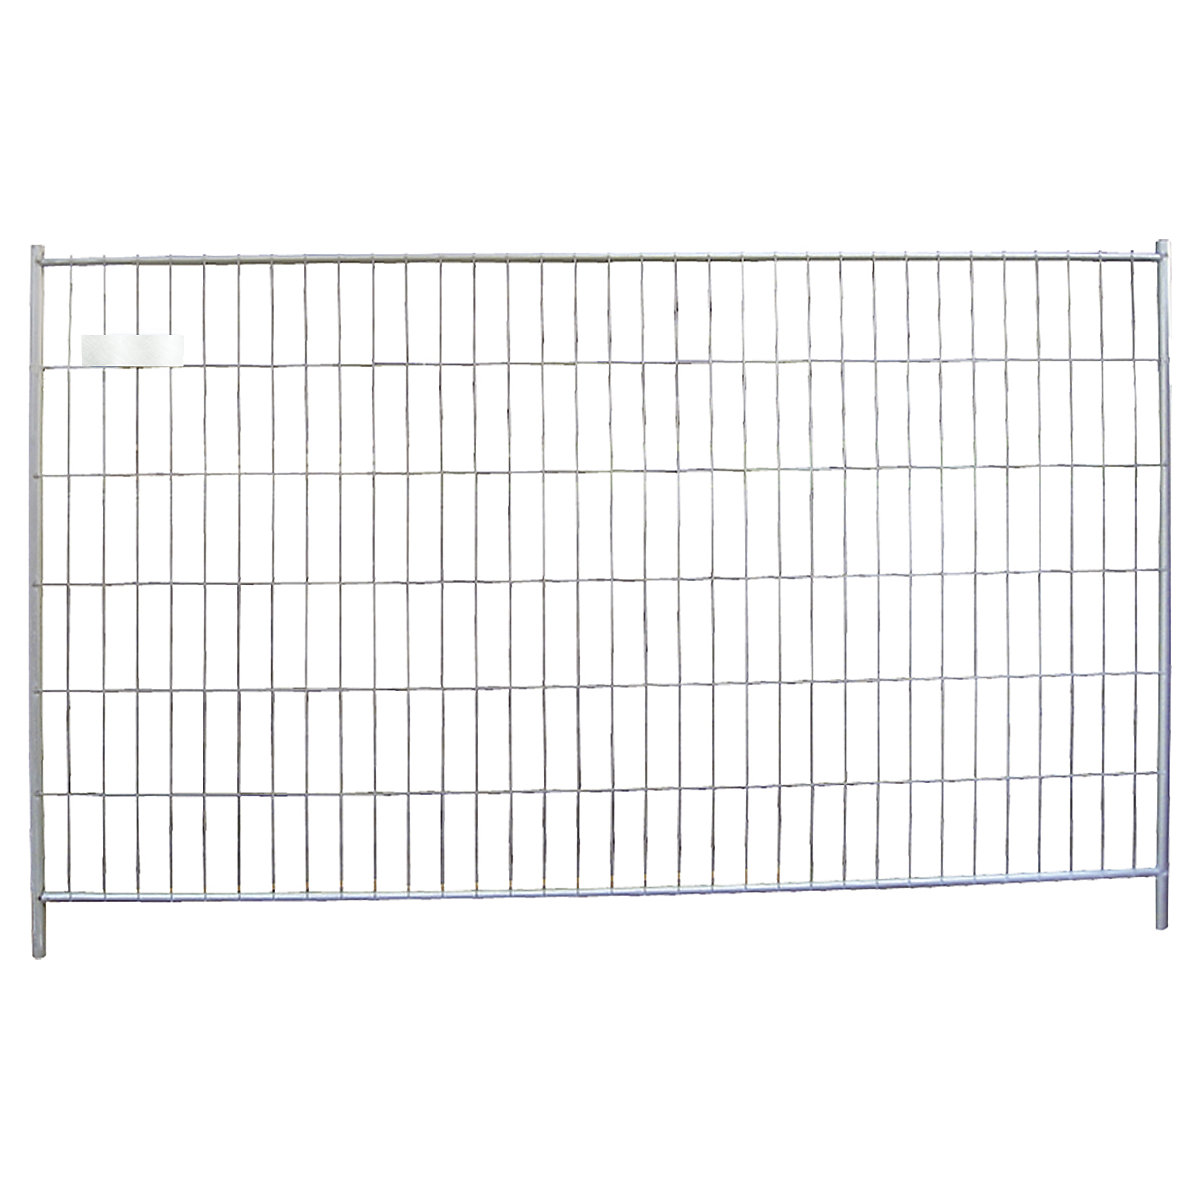 Site fencing, wall unit, width 3500 mm, height 2000 mm-3